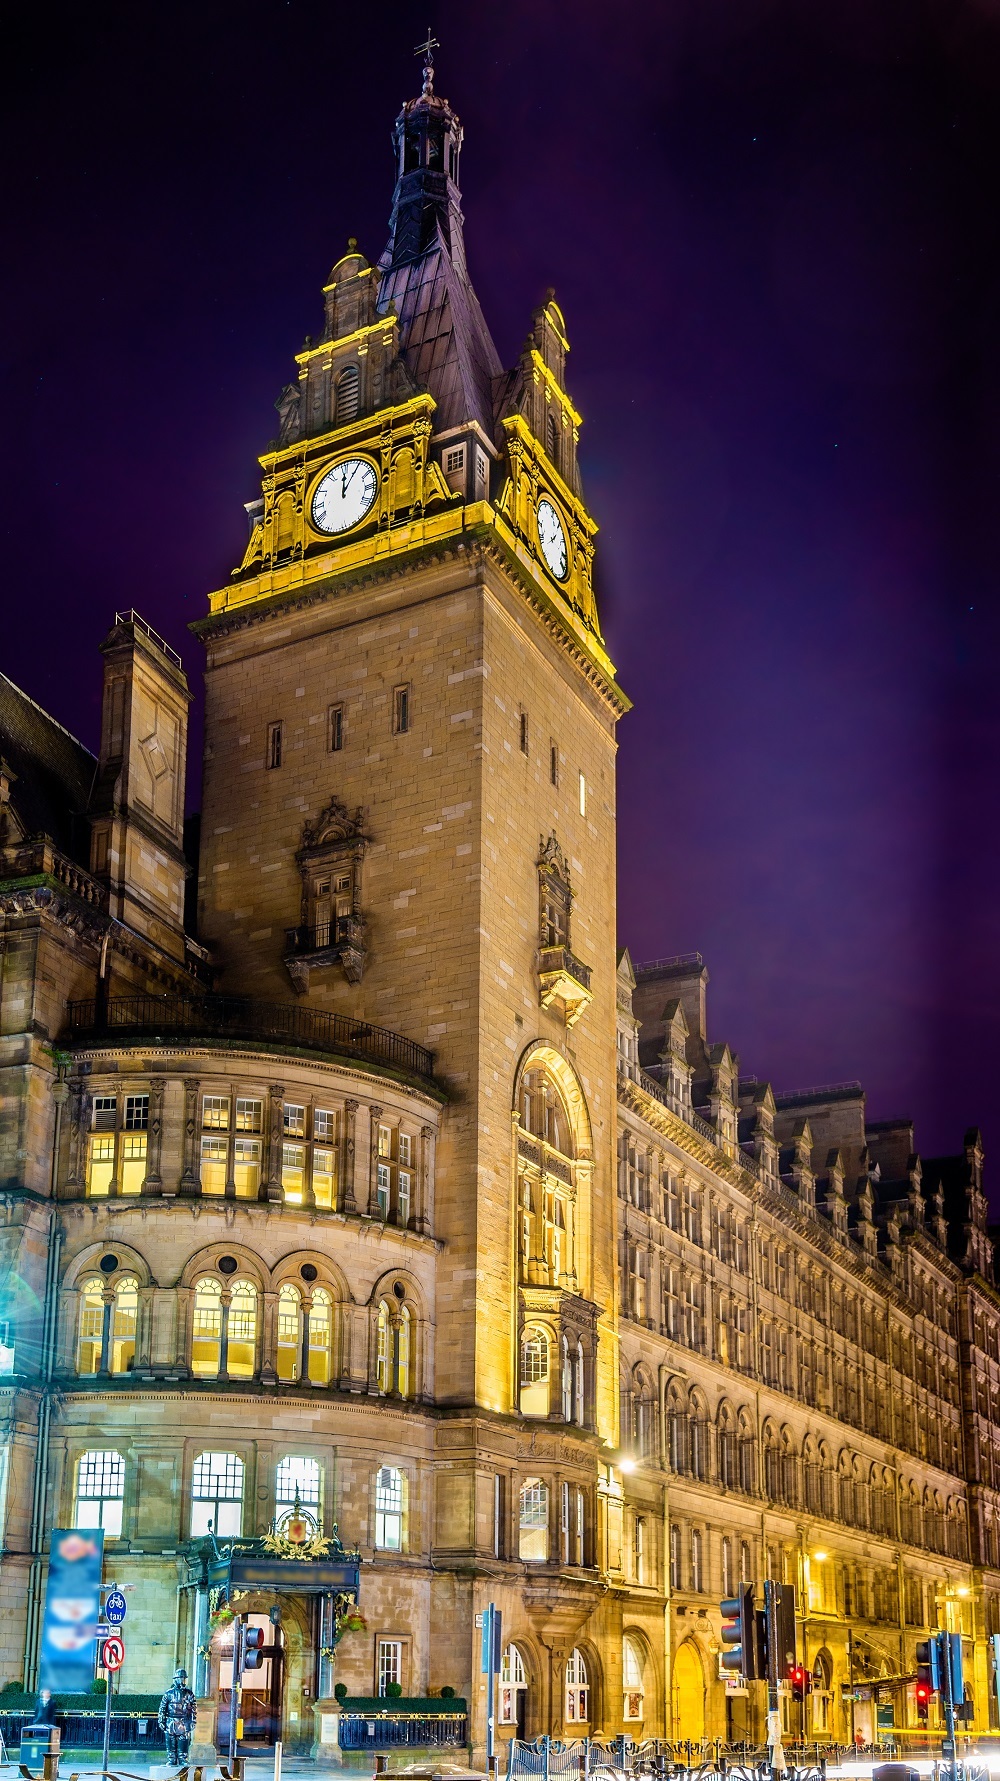 Glasgow’s iconic Grand Central Hotel